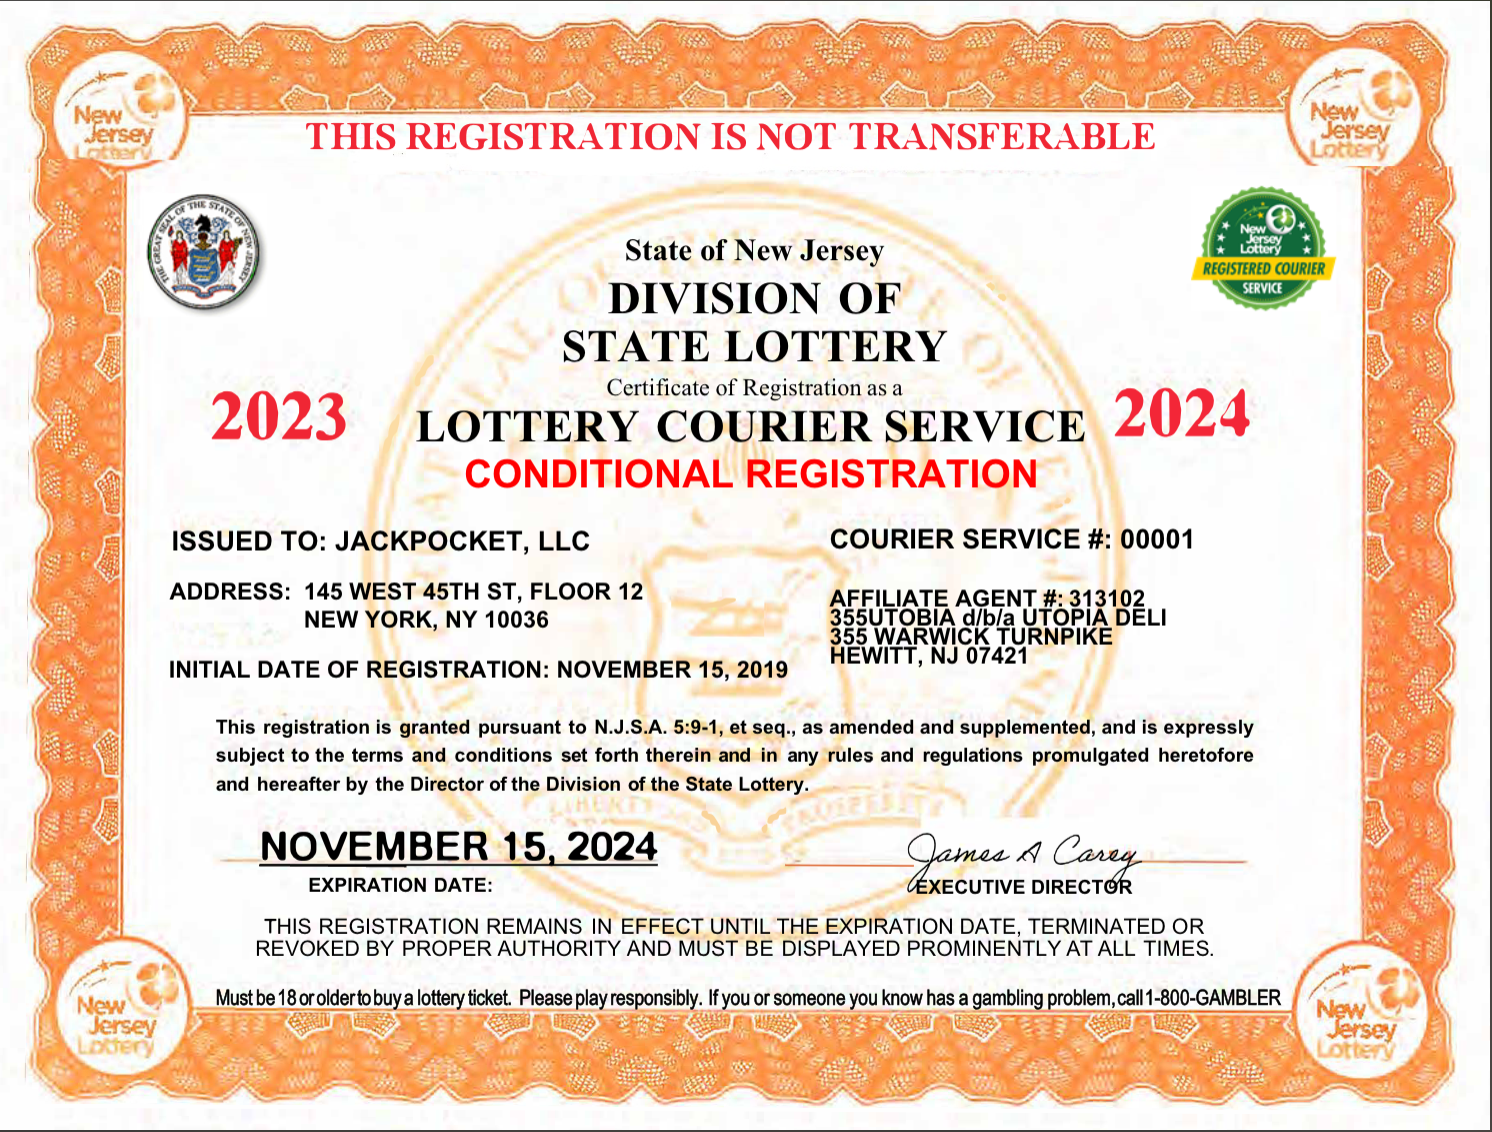 Courier License for New Jersey